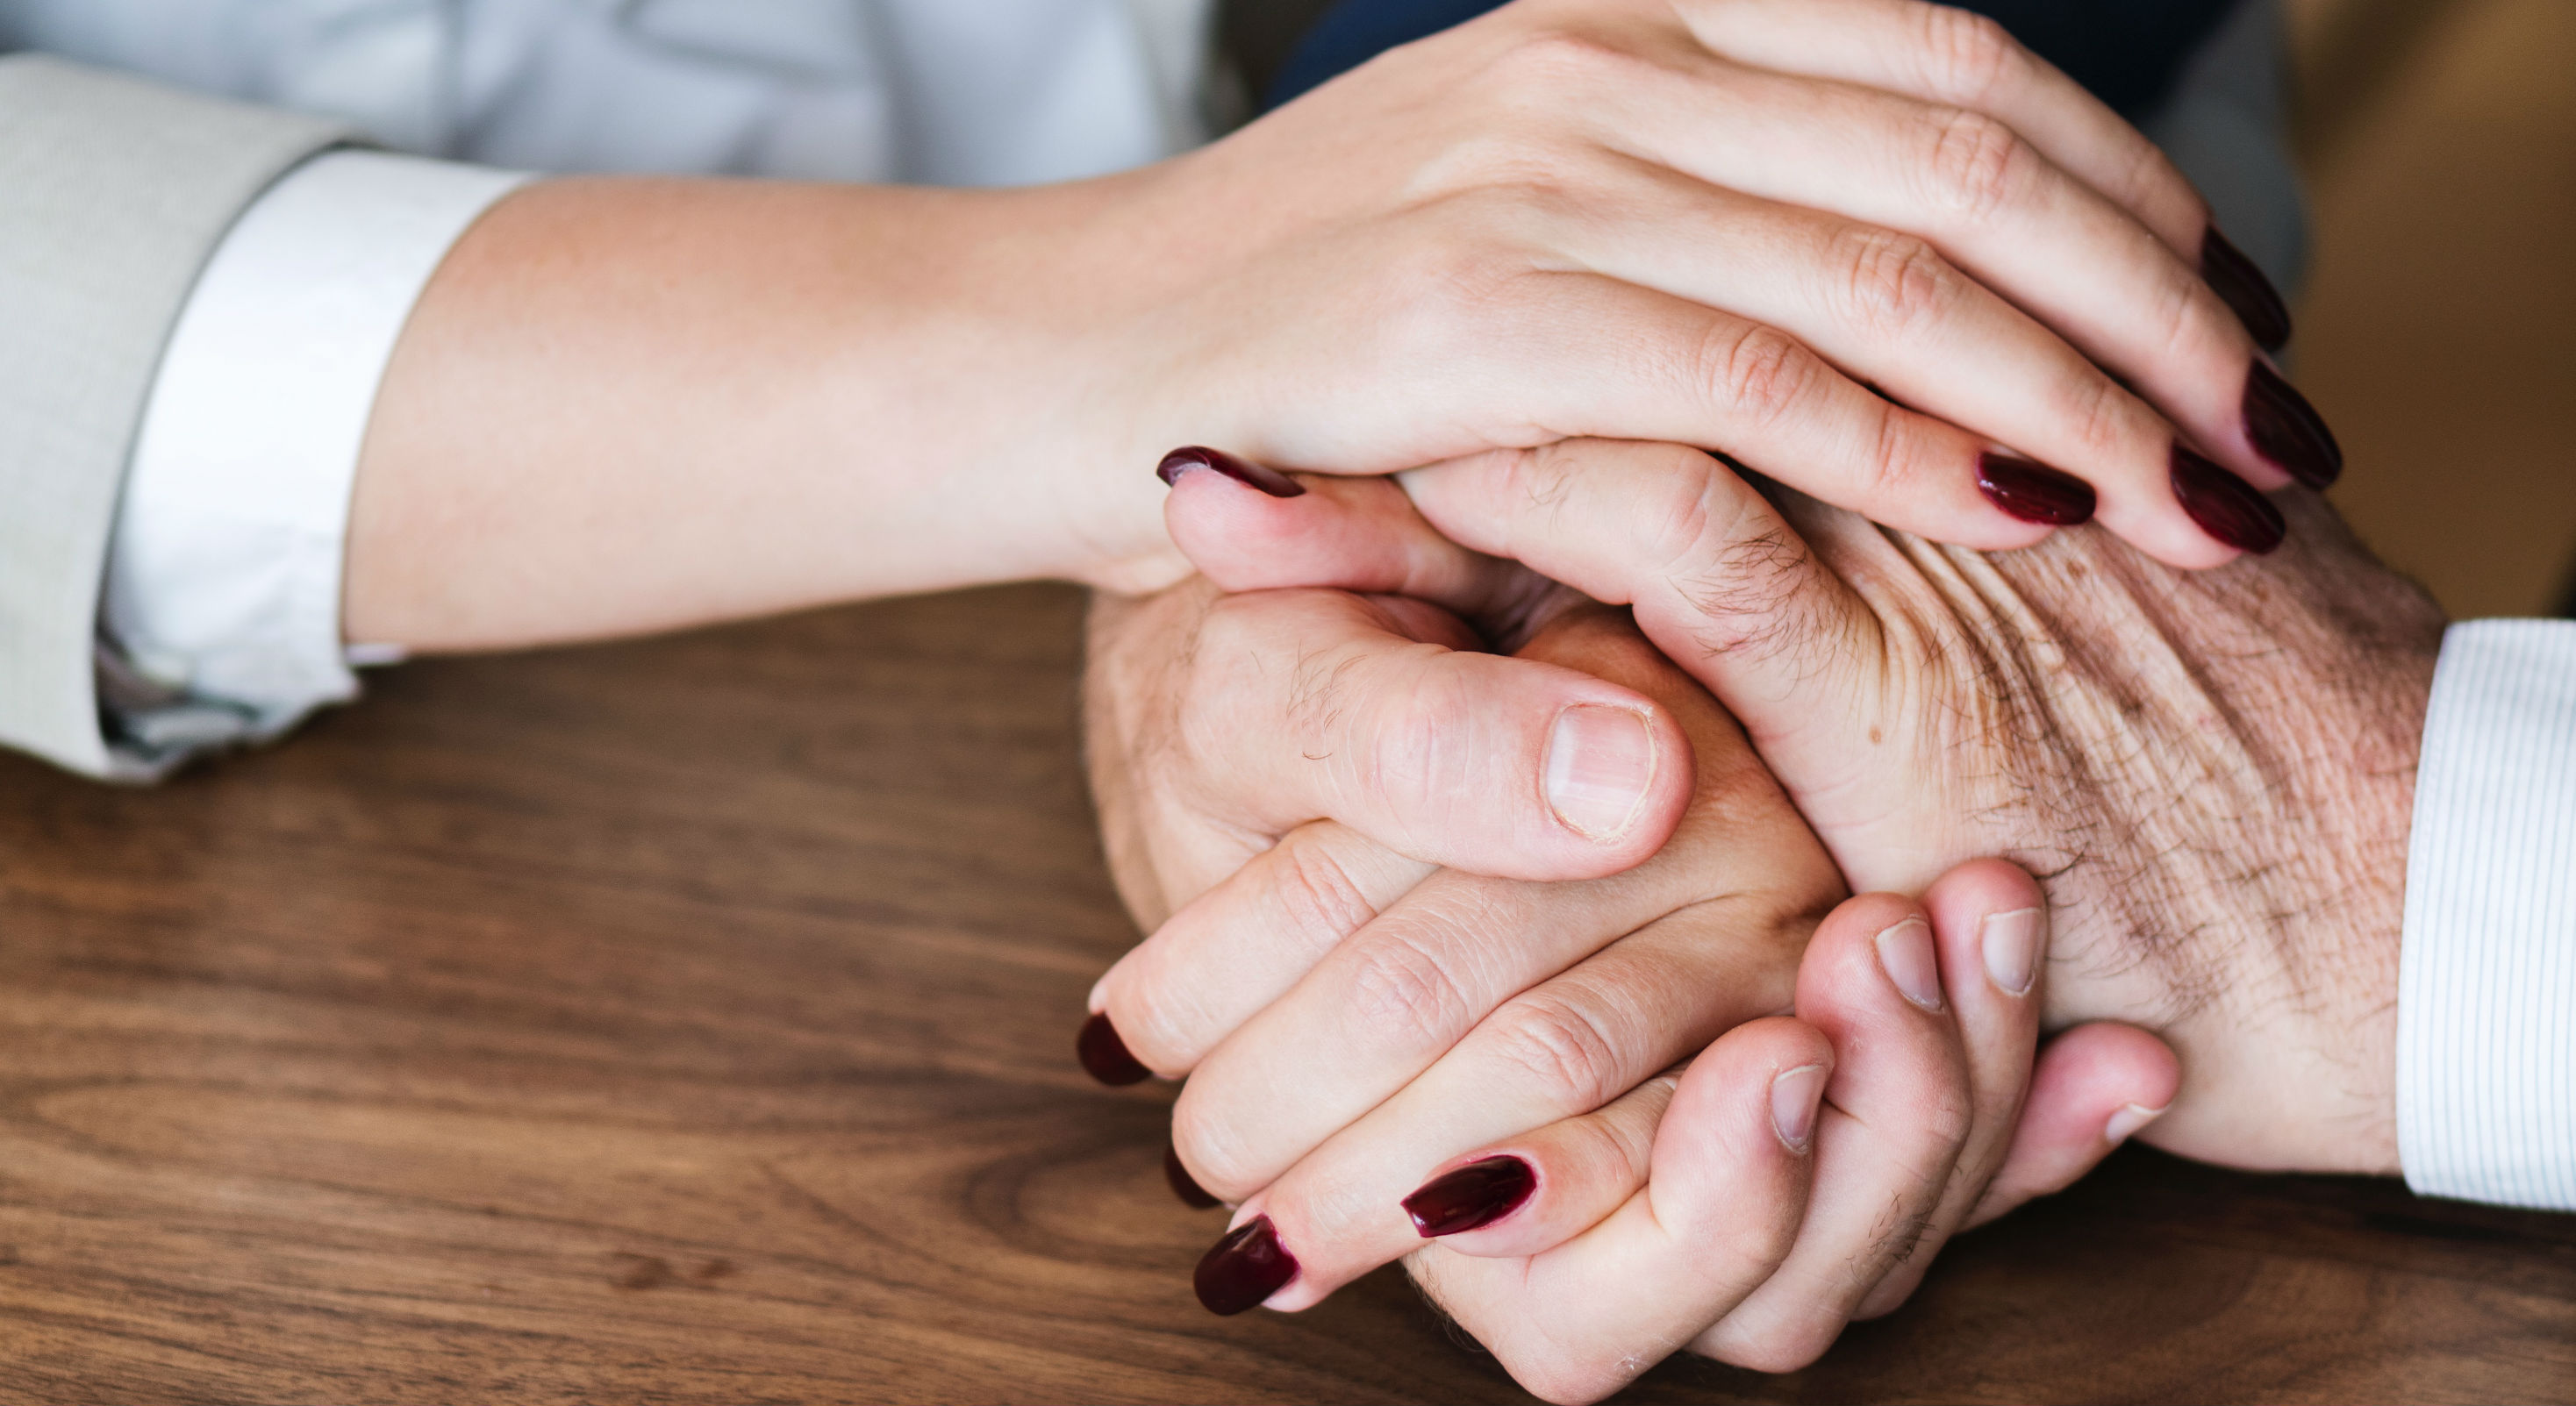 Caring For a Loved One With Dementia